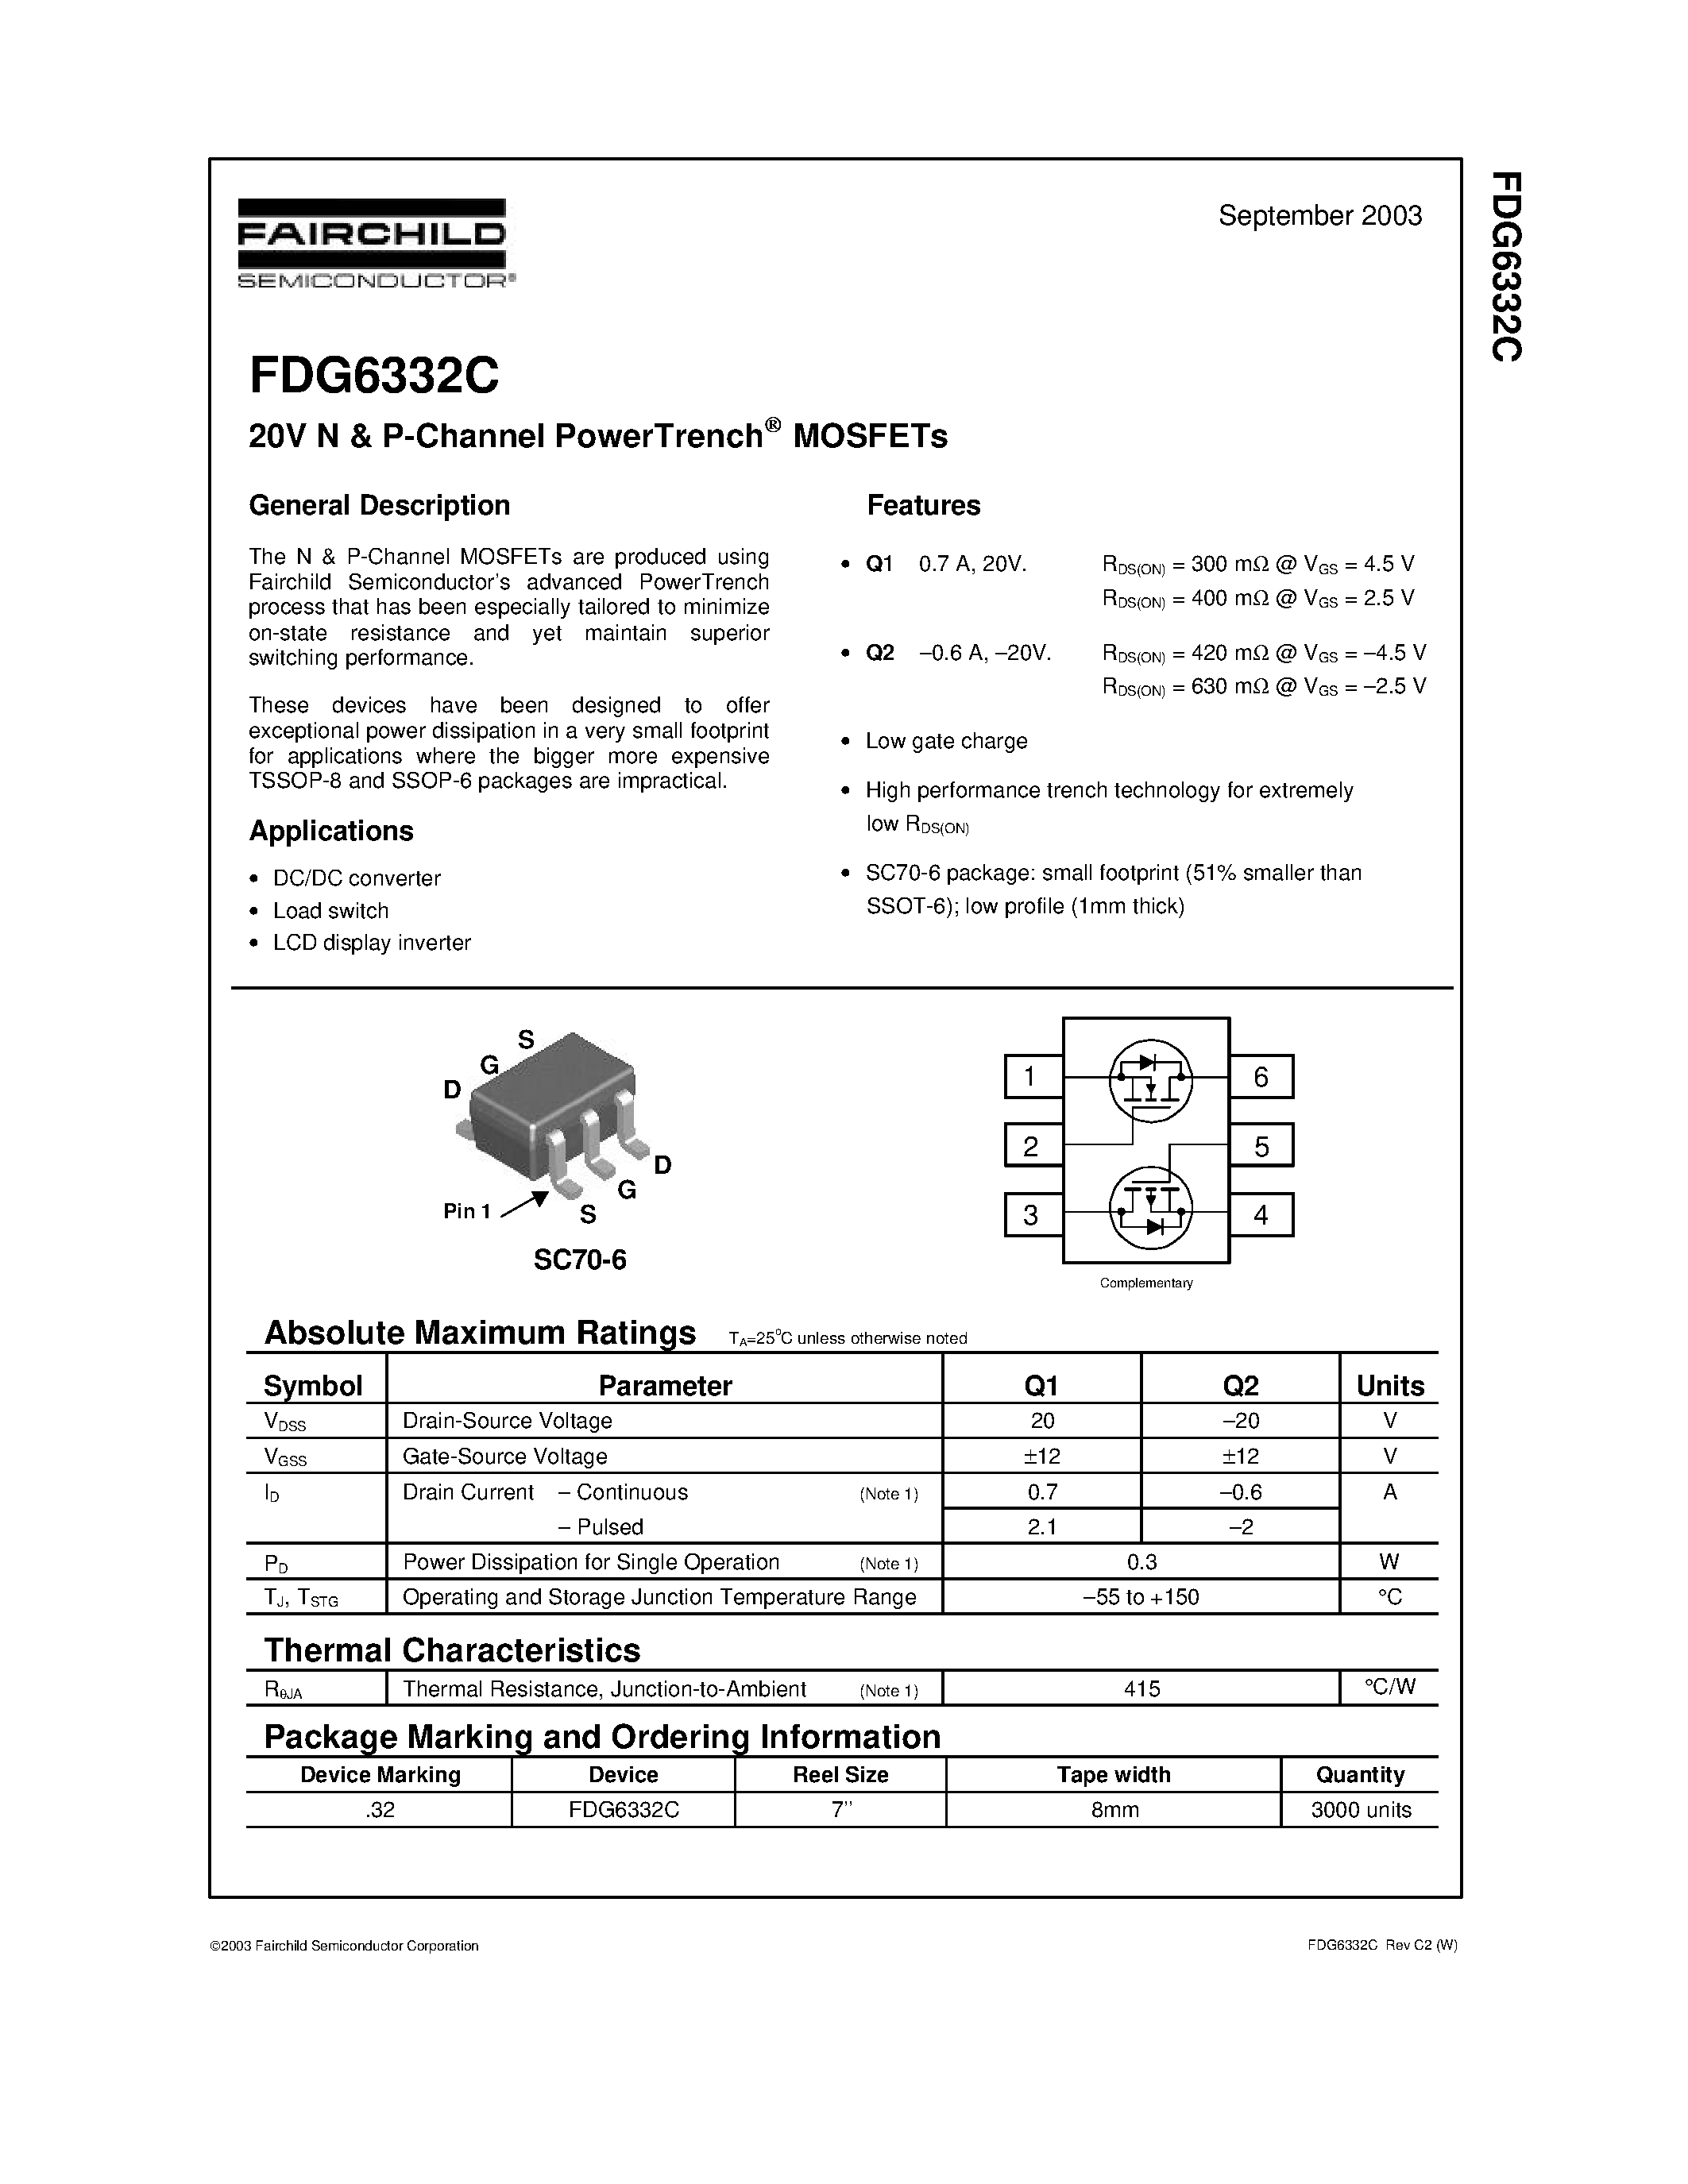 Даташит FDG6332C-20V N & P-Channel PowerTrench MOSFETs страница 1